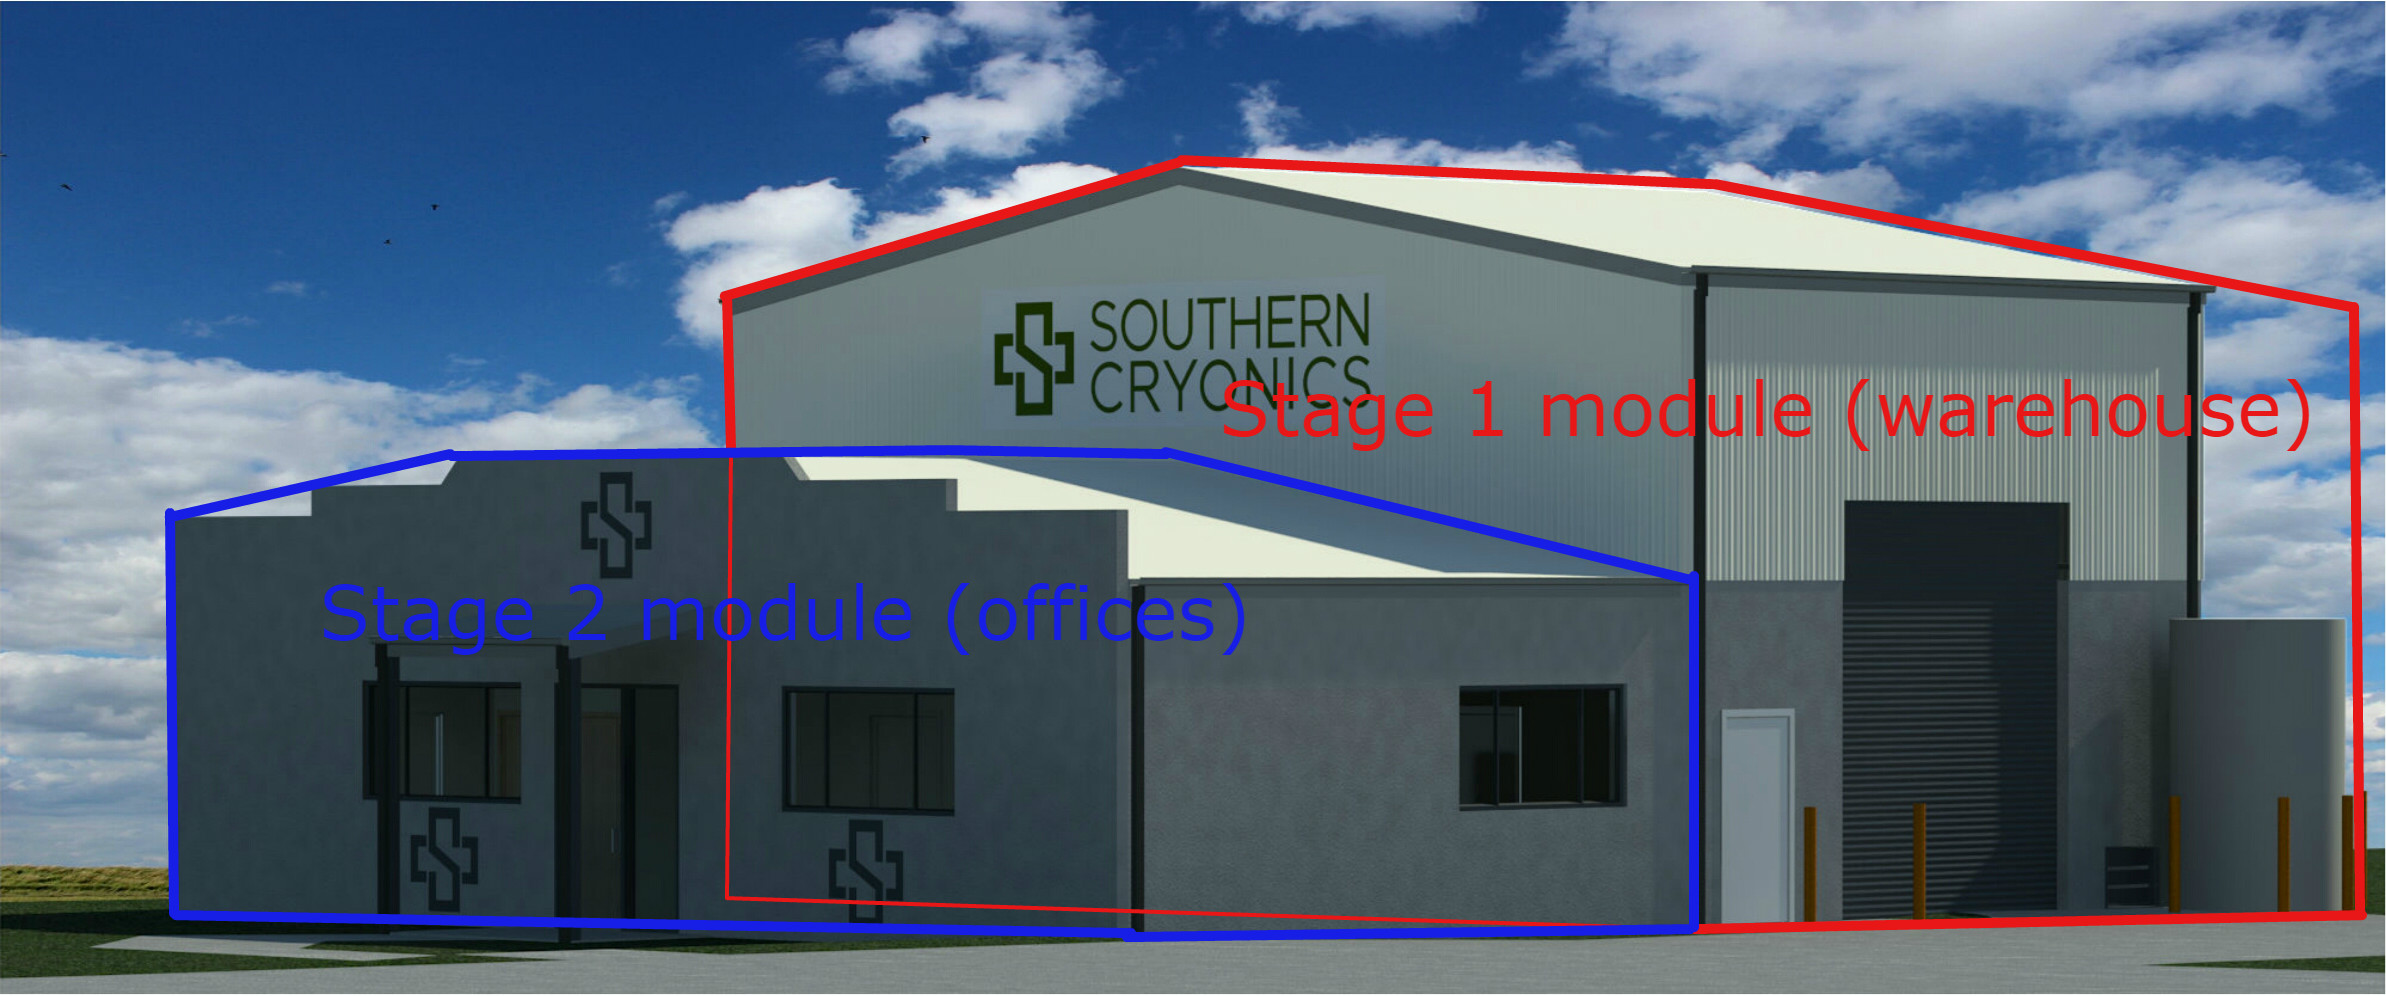 Southern Cryonics Facility rendering